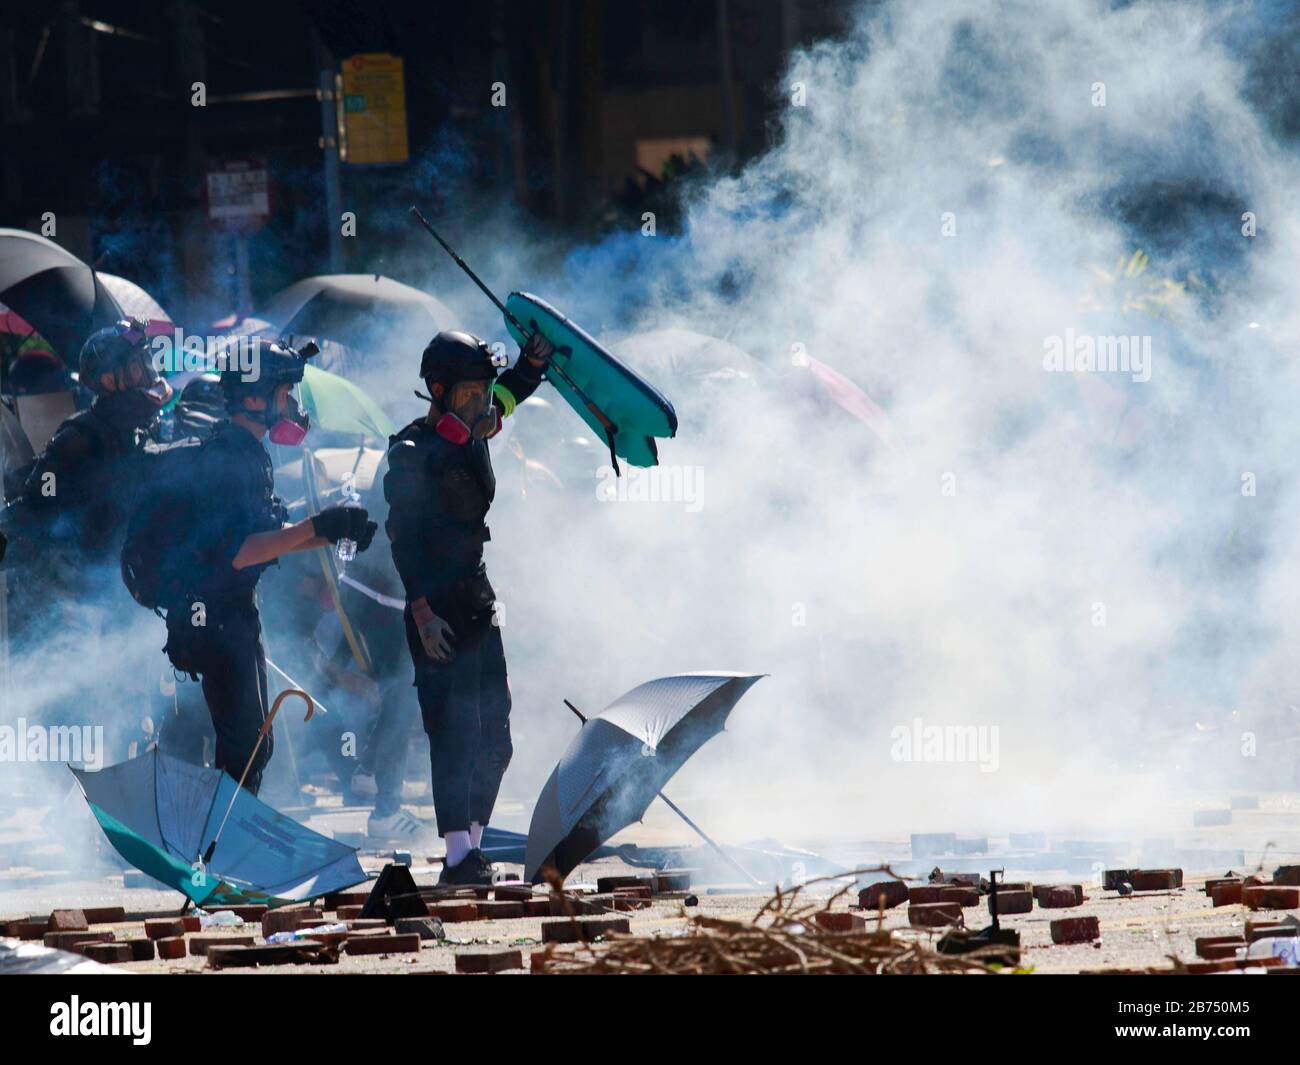 Protesters clash with police at the Hong Kong Polytechnic University. Stock Photo